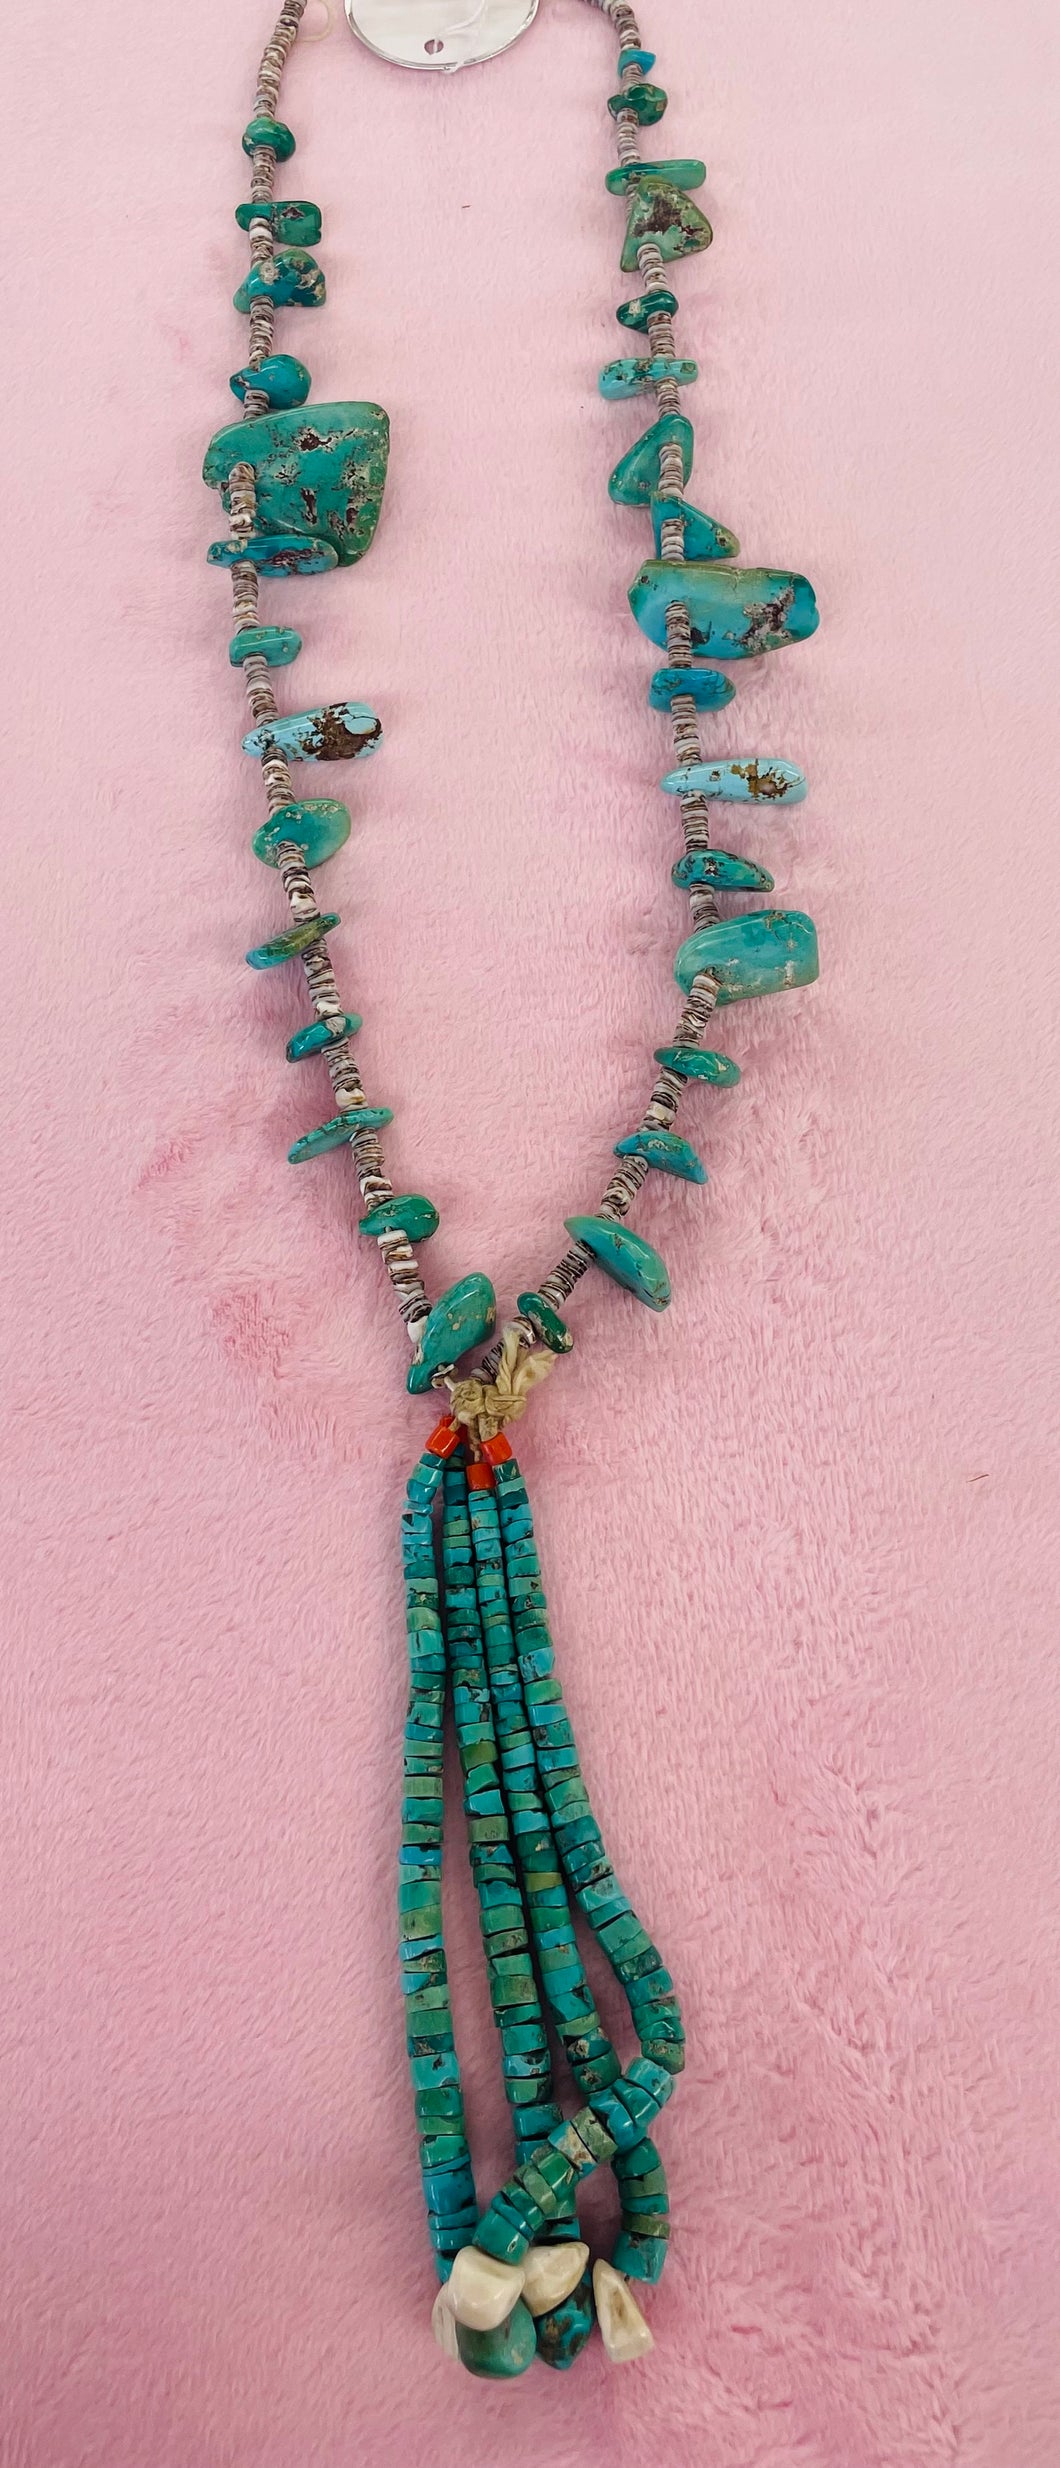 Vintage Hand Strung Turquoise Beads Necklace